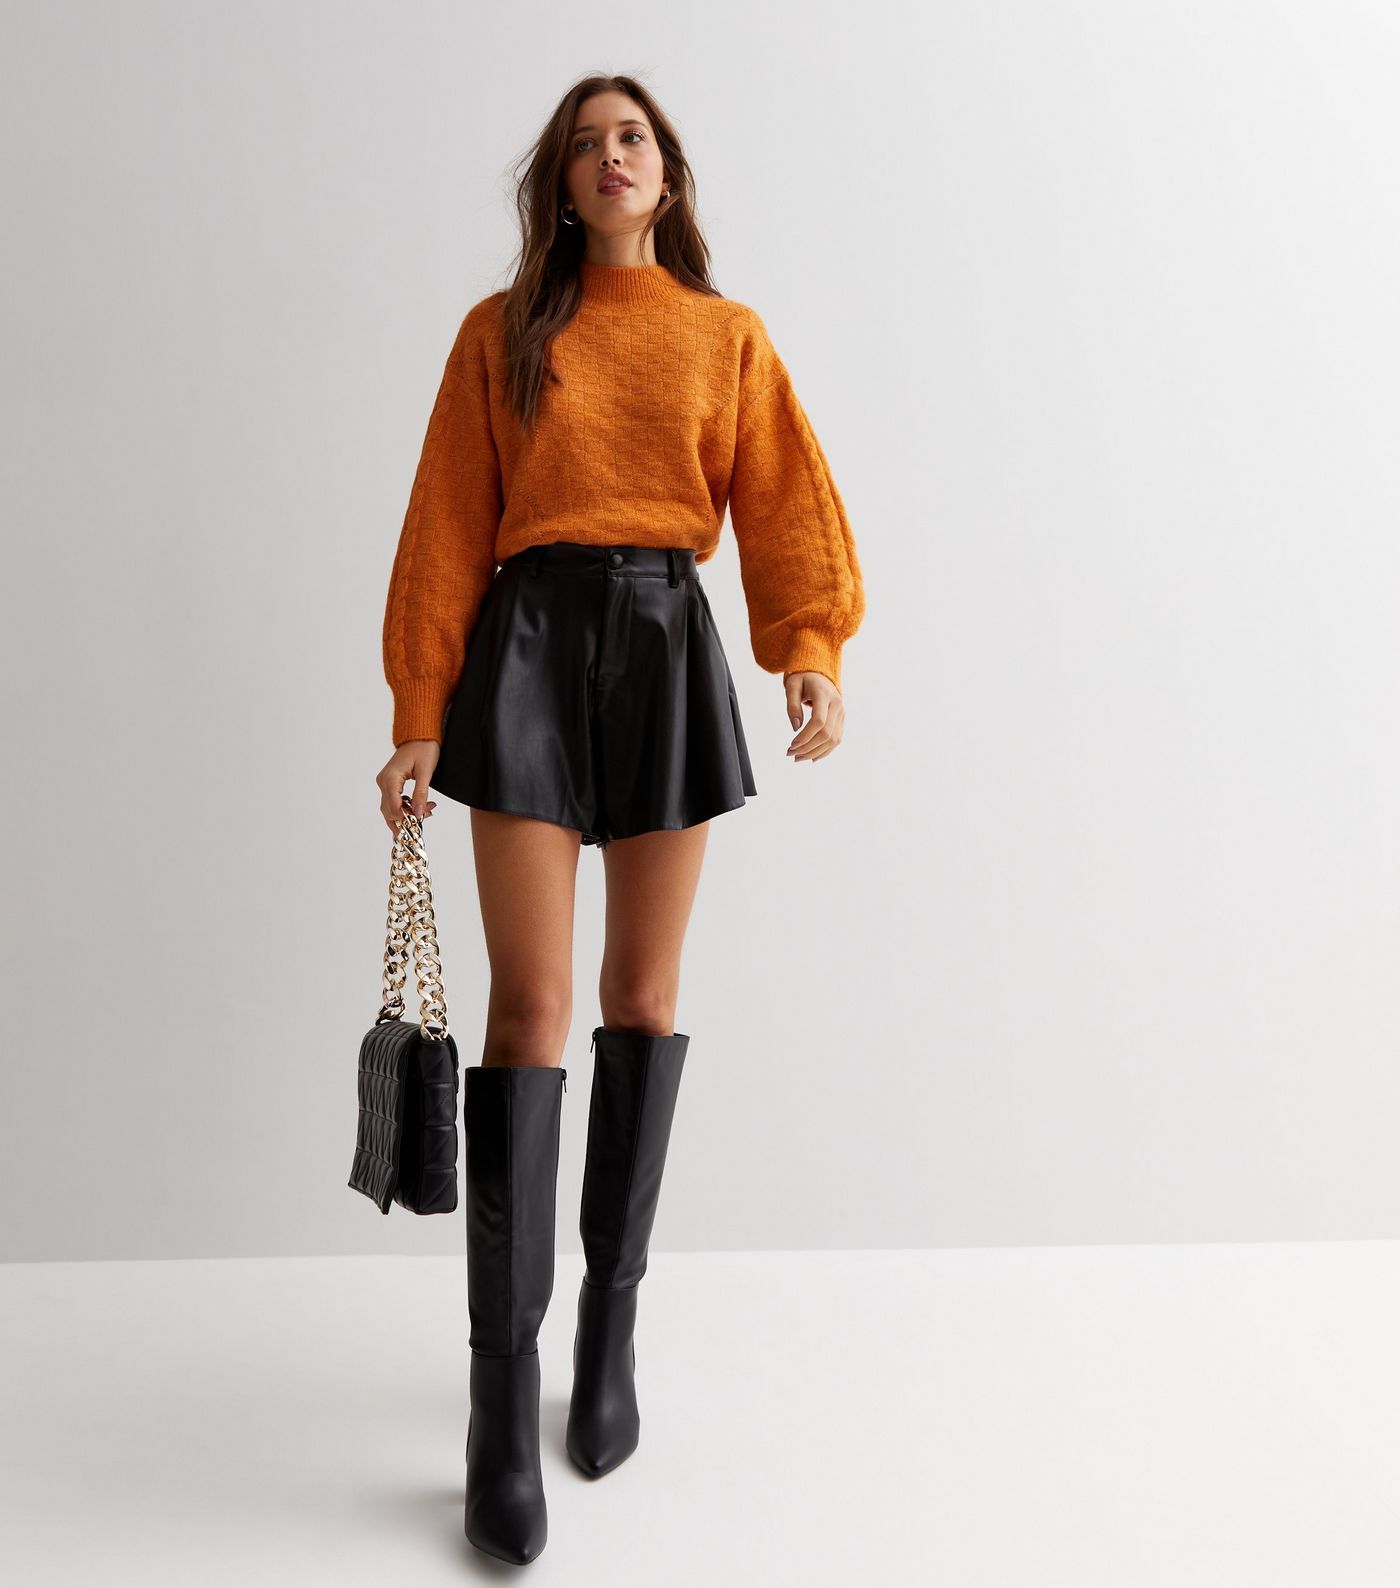 Cameo Rose Black Leather-Look Flippy Shorts
						
						Add to Saved Items
						Remove from Sav... | New Look (UK)